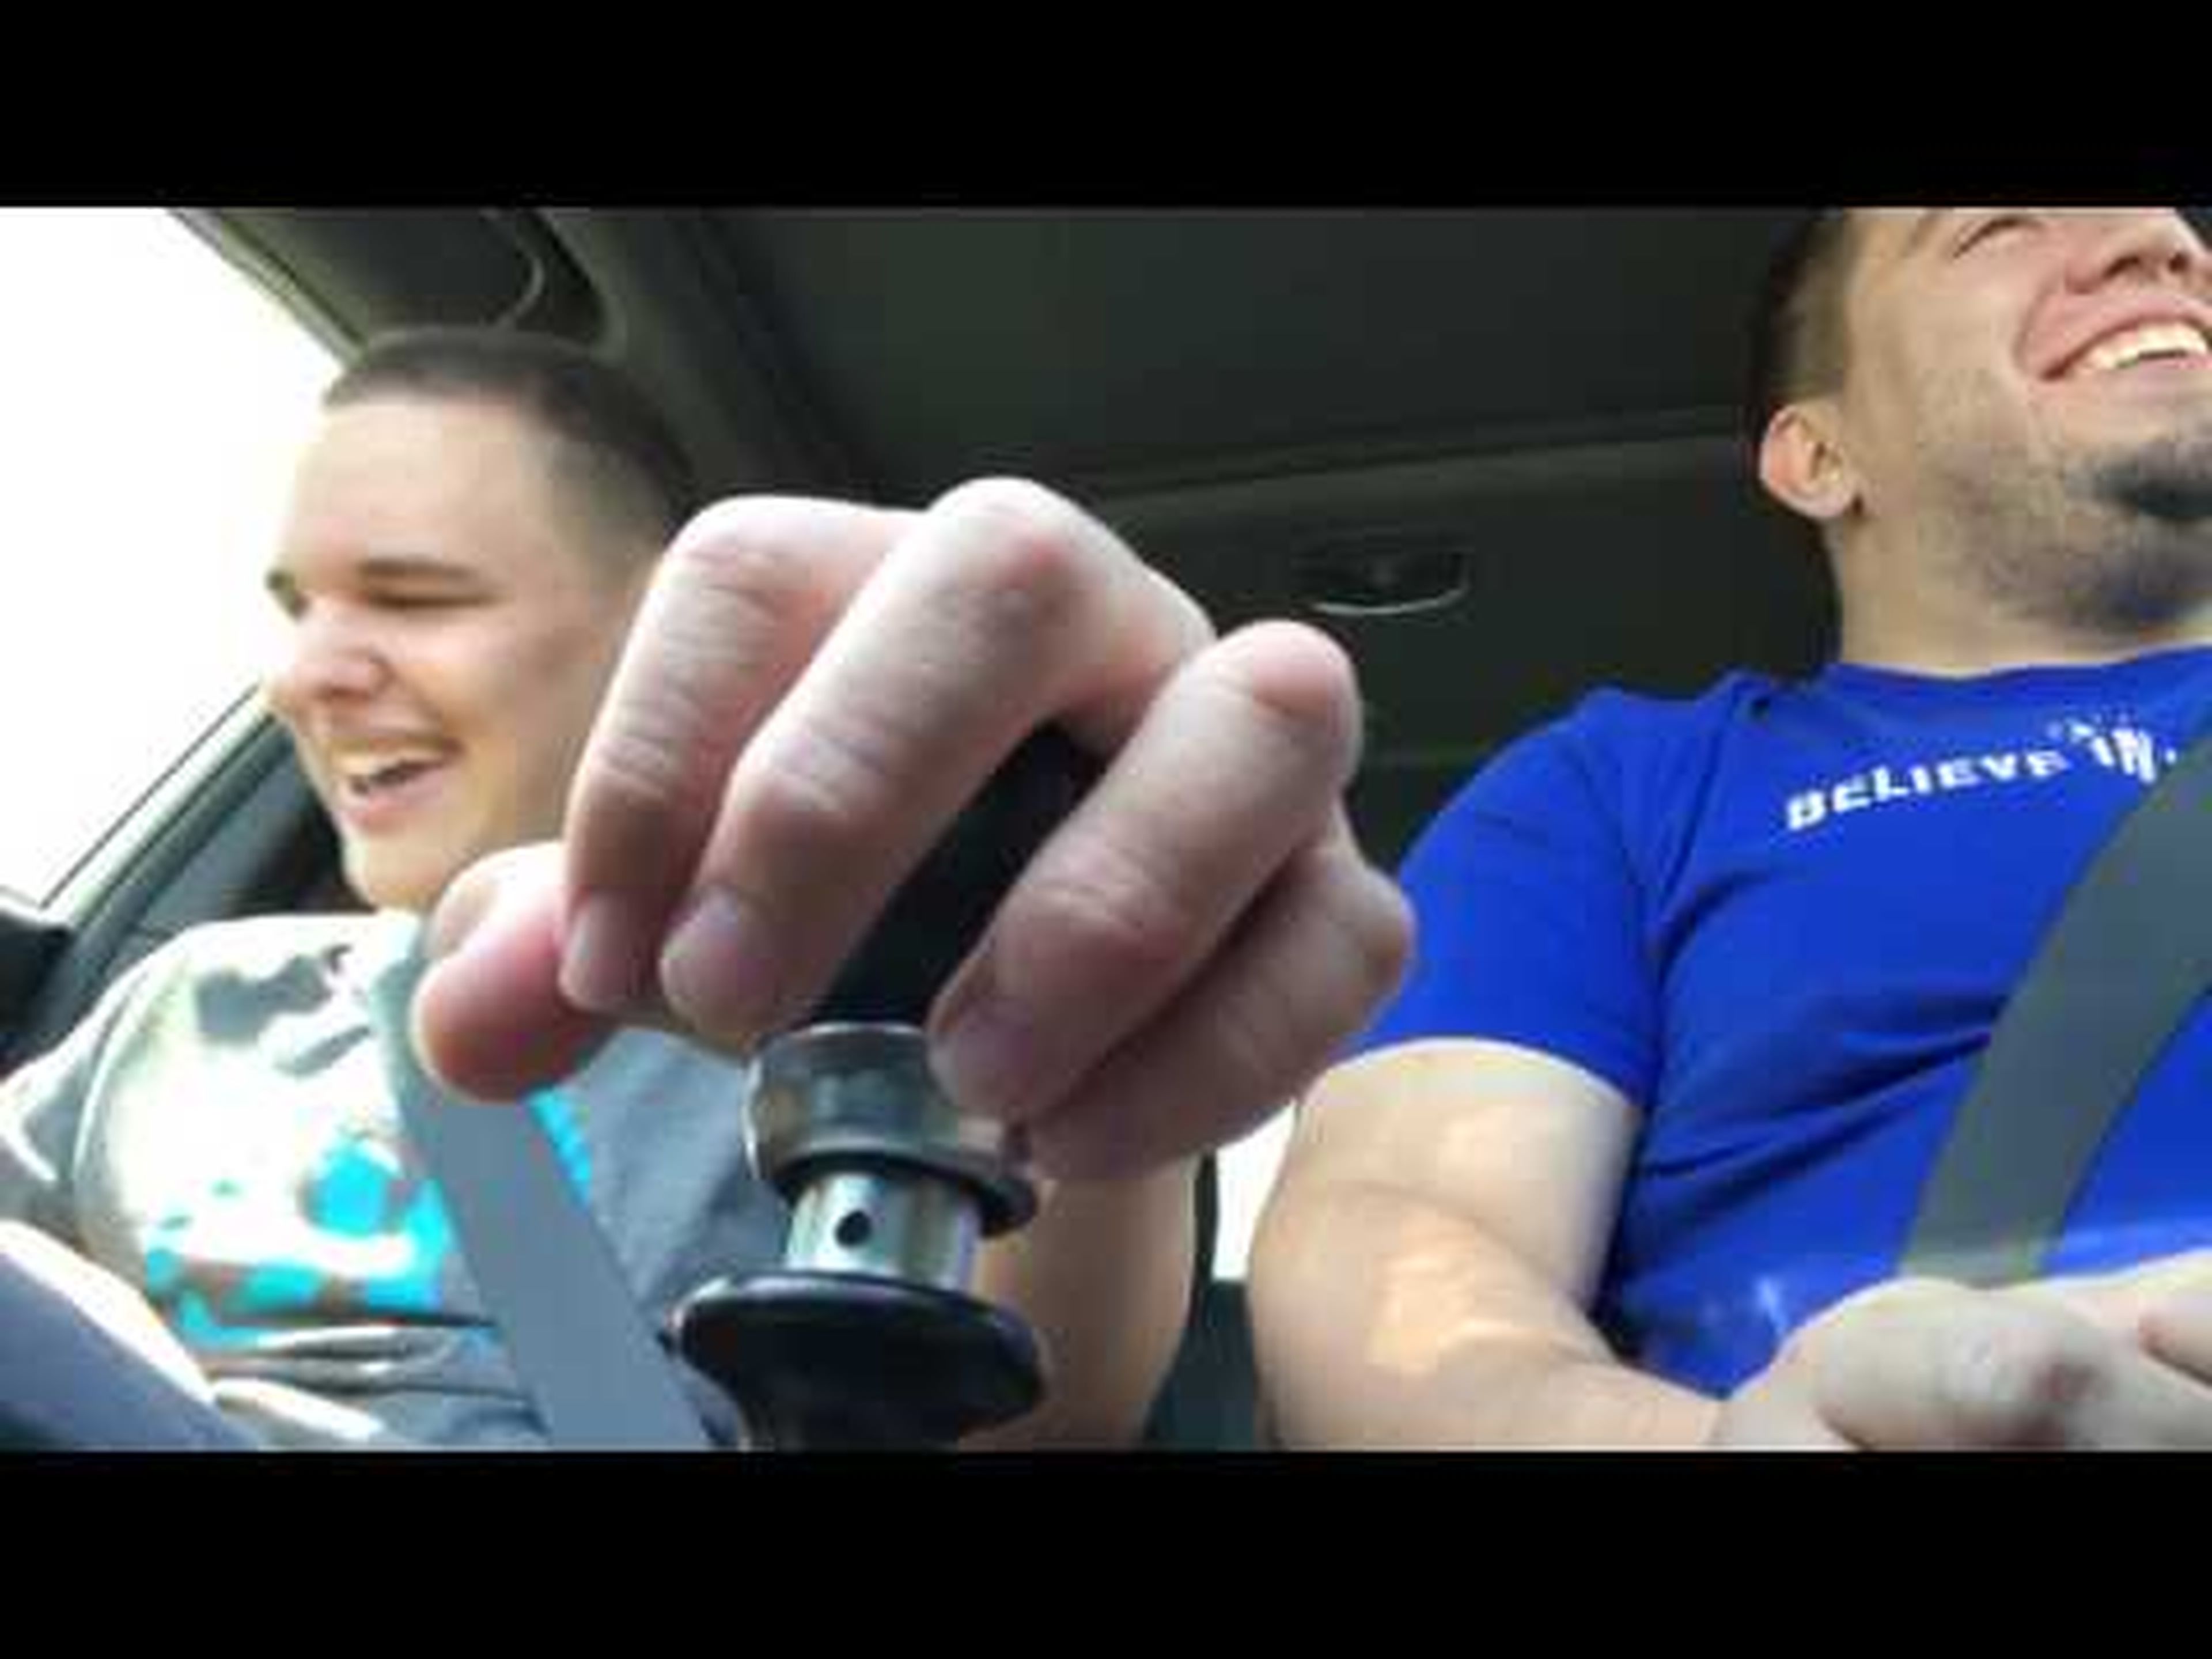 Taught my son, Spenny who is blind + autistic how to shift gears in our Subaru STi